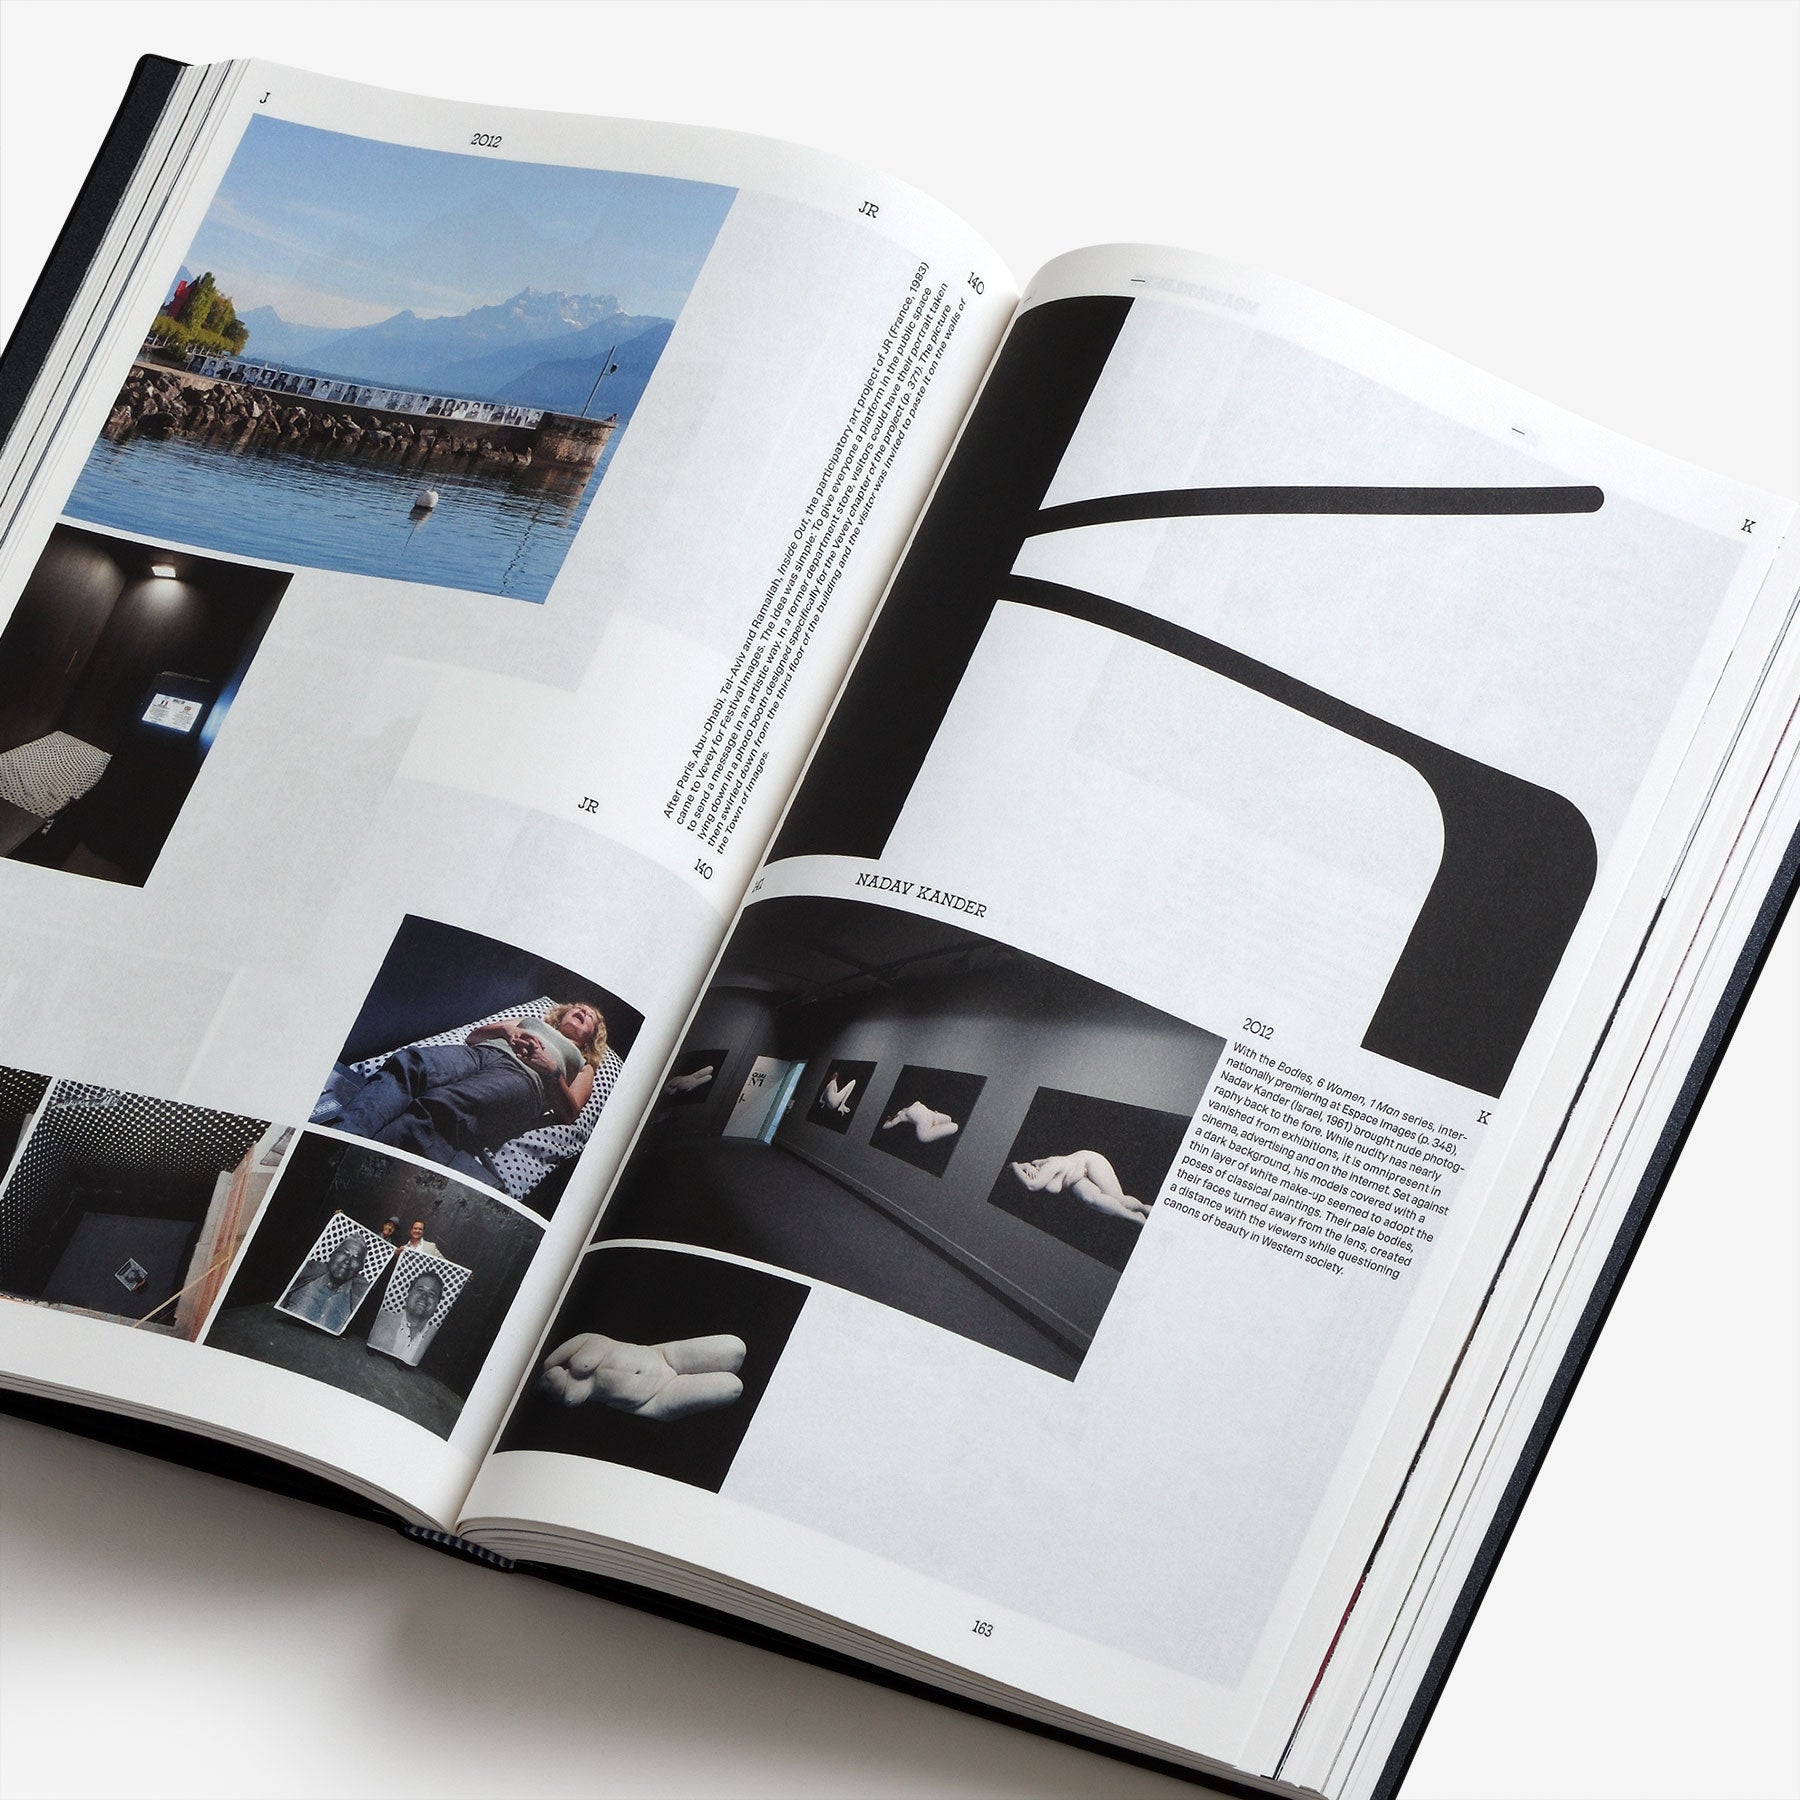 The Book of Images: An Illustrated Dictionary of Visual Experiences [書籍]